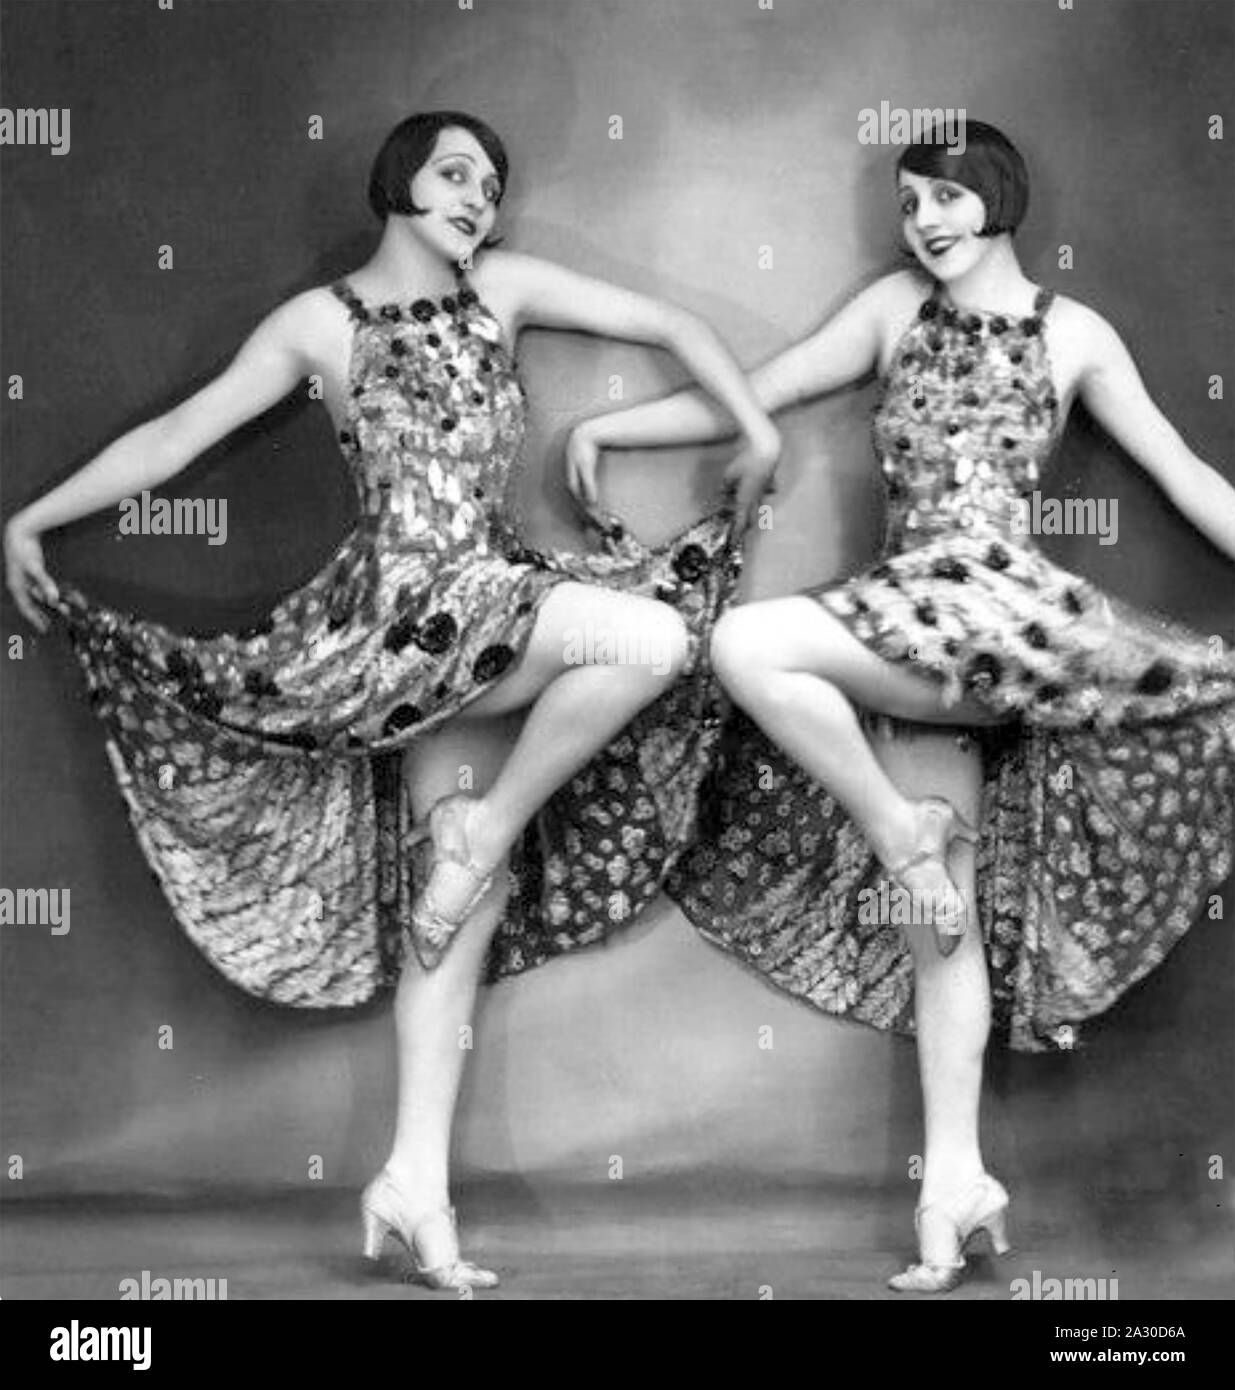 1920s Flappers: The flapper look is seen frequently